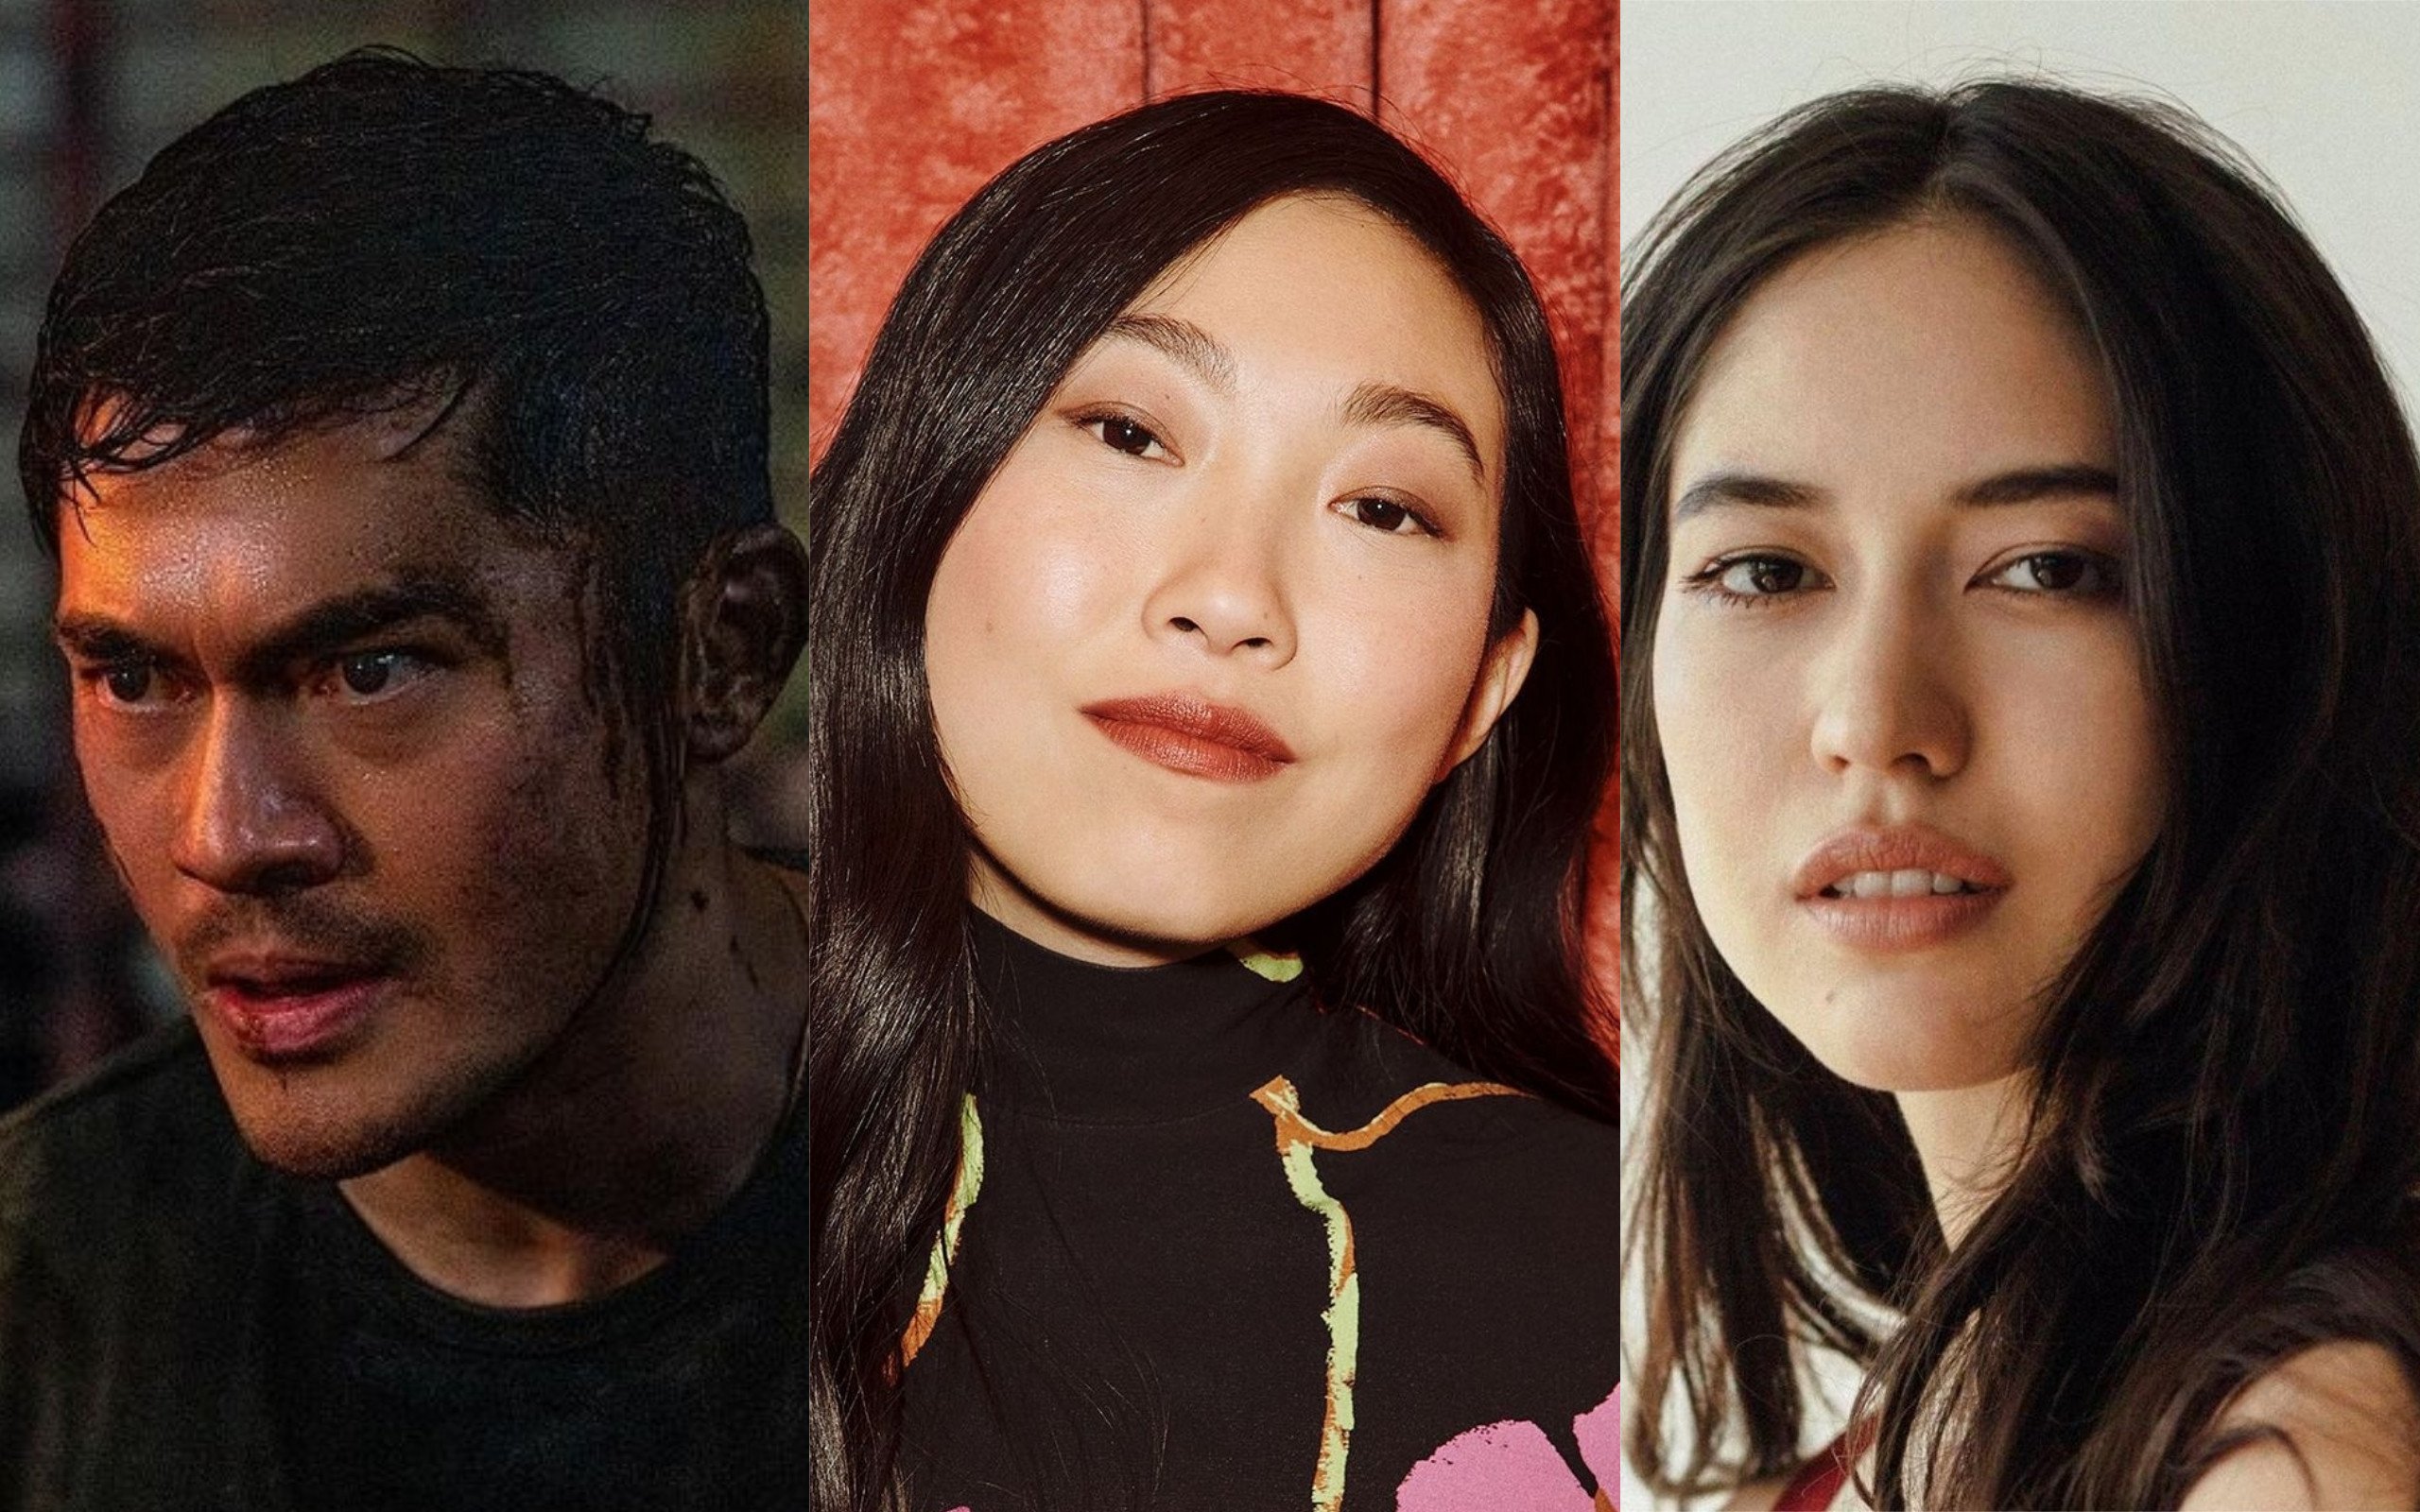 Henry Golding headlines a G.I. Joe spinoff and a Jane Austen drama, Awkwafina continues to shine in Disney and enters the MCU and Sonoya Mizuno joins Game of Thrones prequel cast. Photos: @henrygolding, @awkwafina, @houseofdragongot/ Instagram